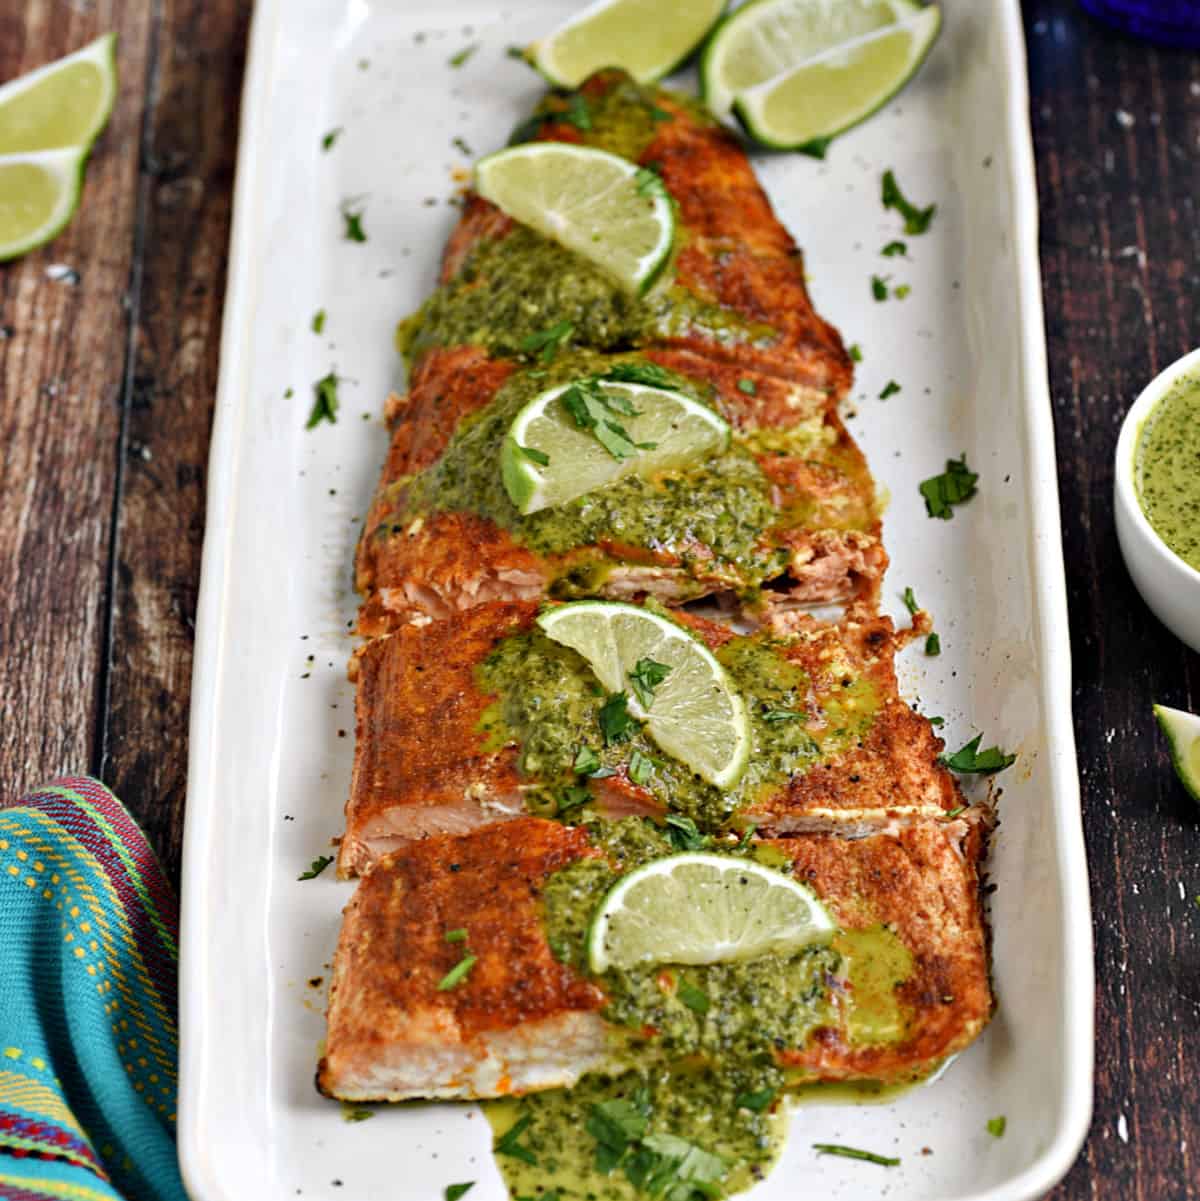 Baked salmon filet topped with cilantro sauce and lime wedges on a white platter.